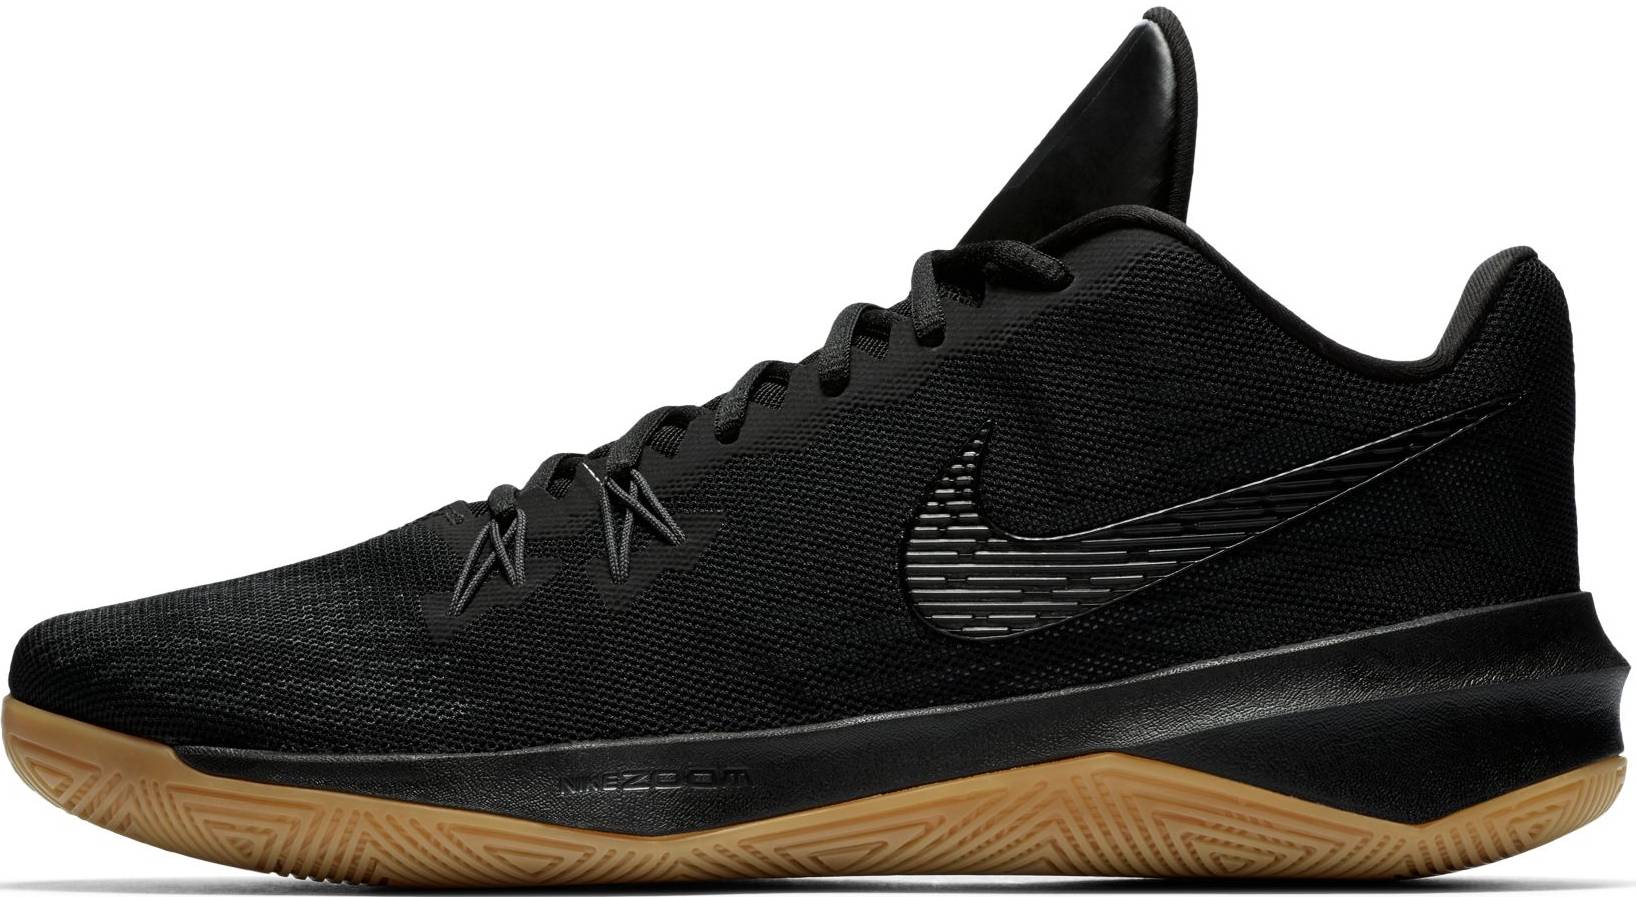 Save 42% on Low Basketball Shoes (175 